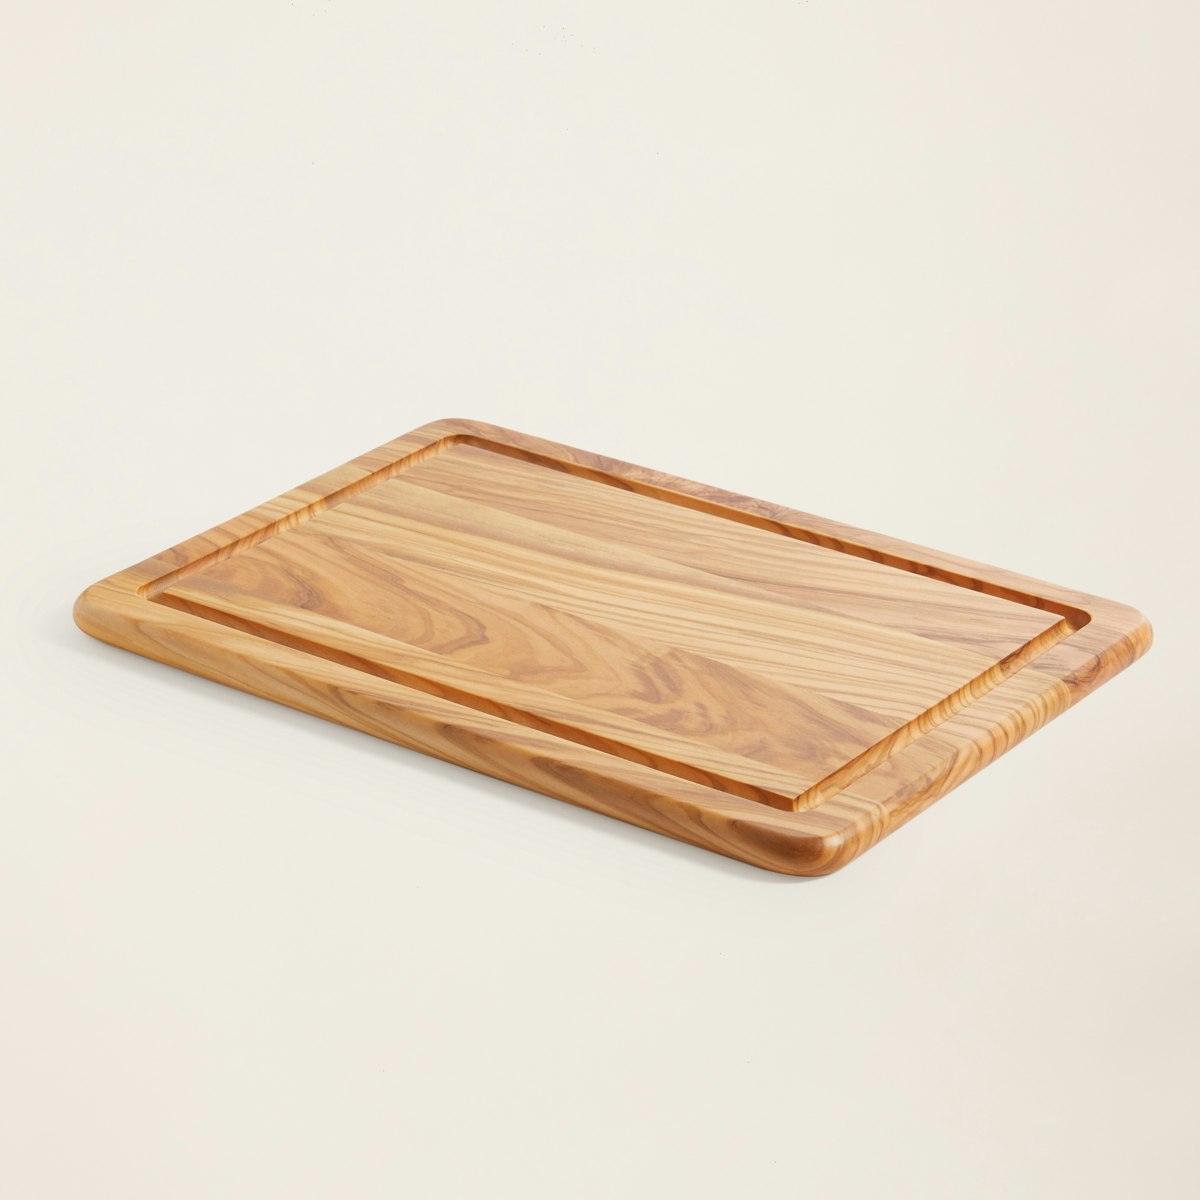 Italian Olivewood Rounded Cutting Board